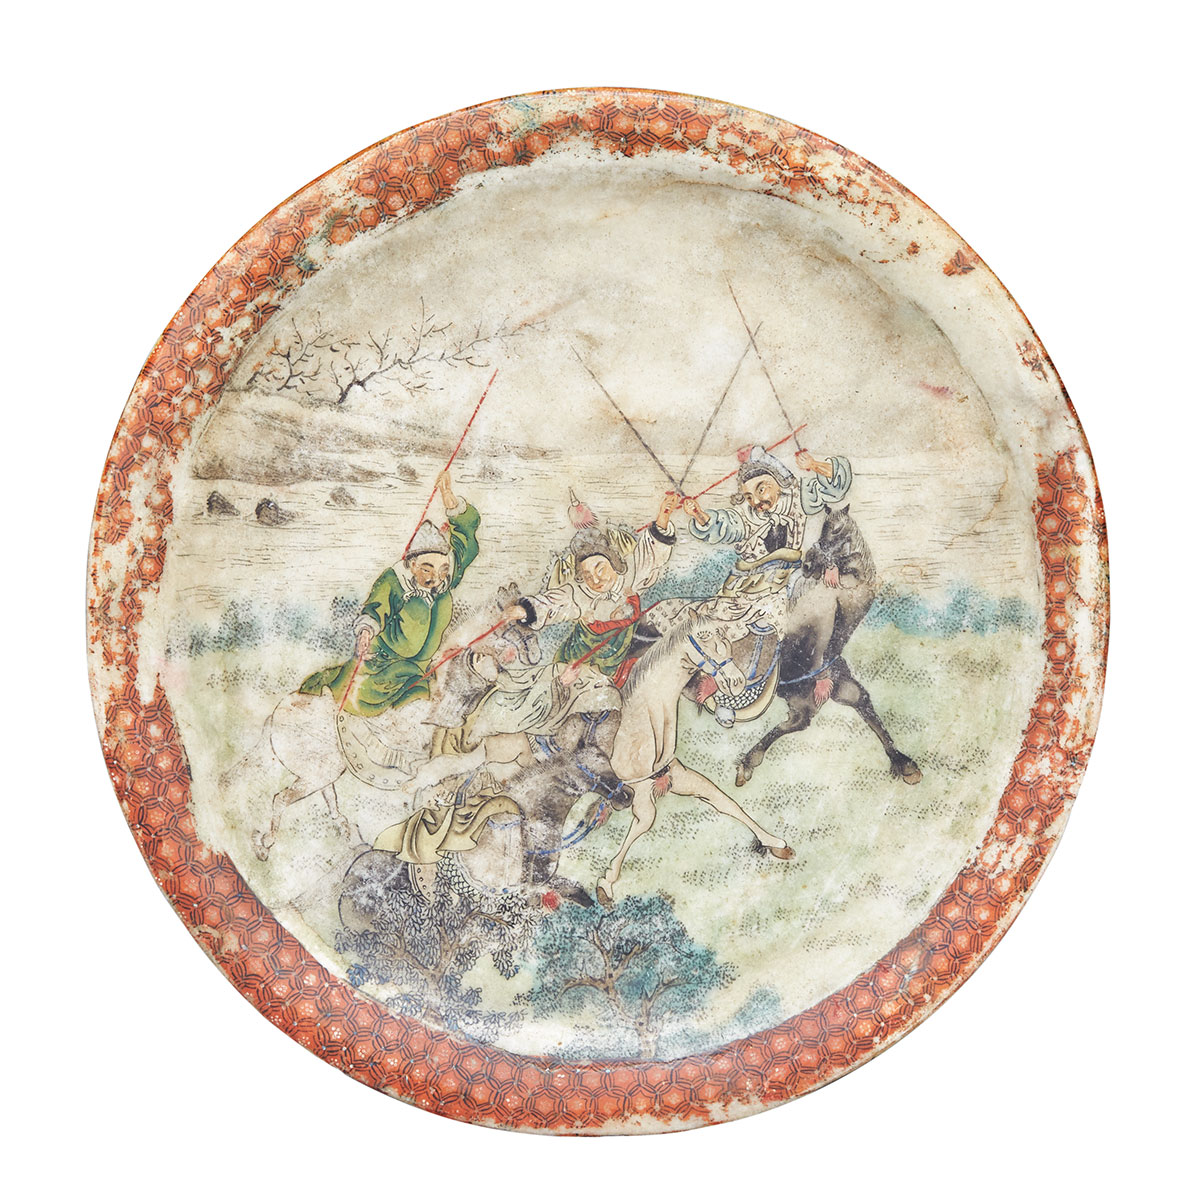 Unusual Polychromed Marble Charger, 19th Century